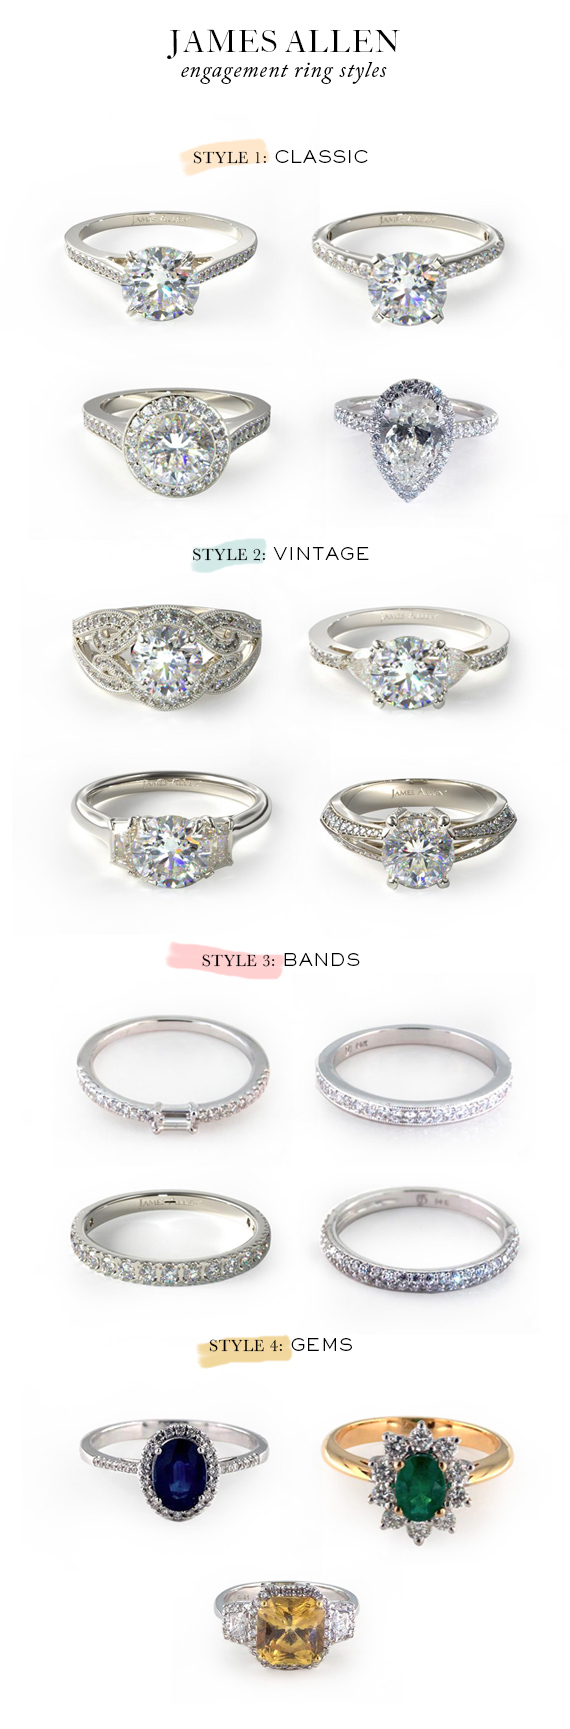 James Allen engagement ring styles